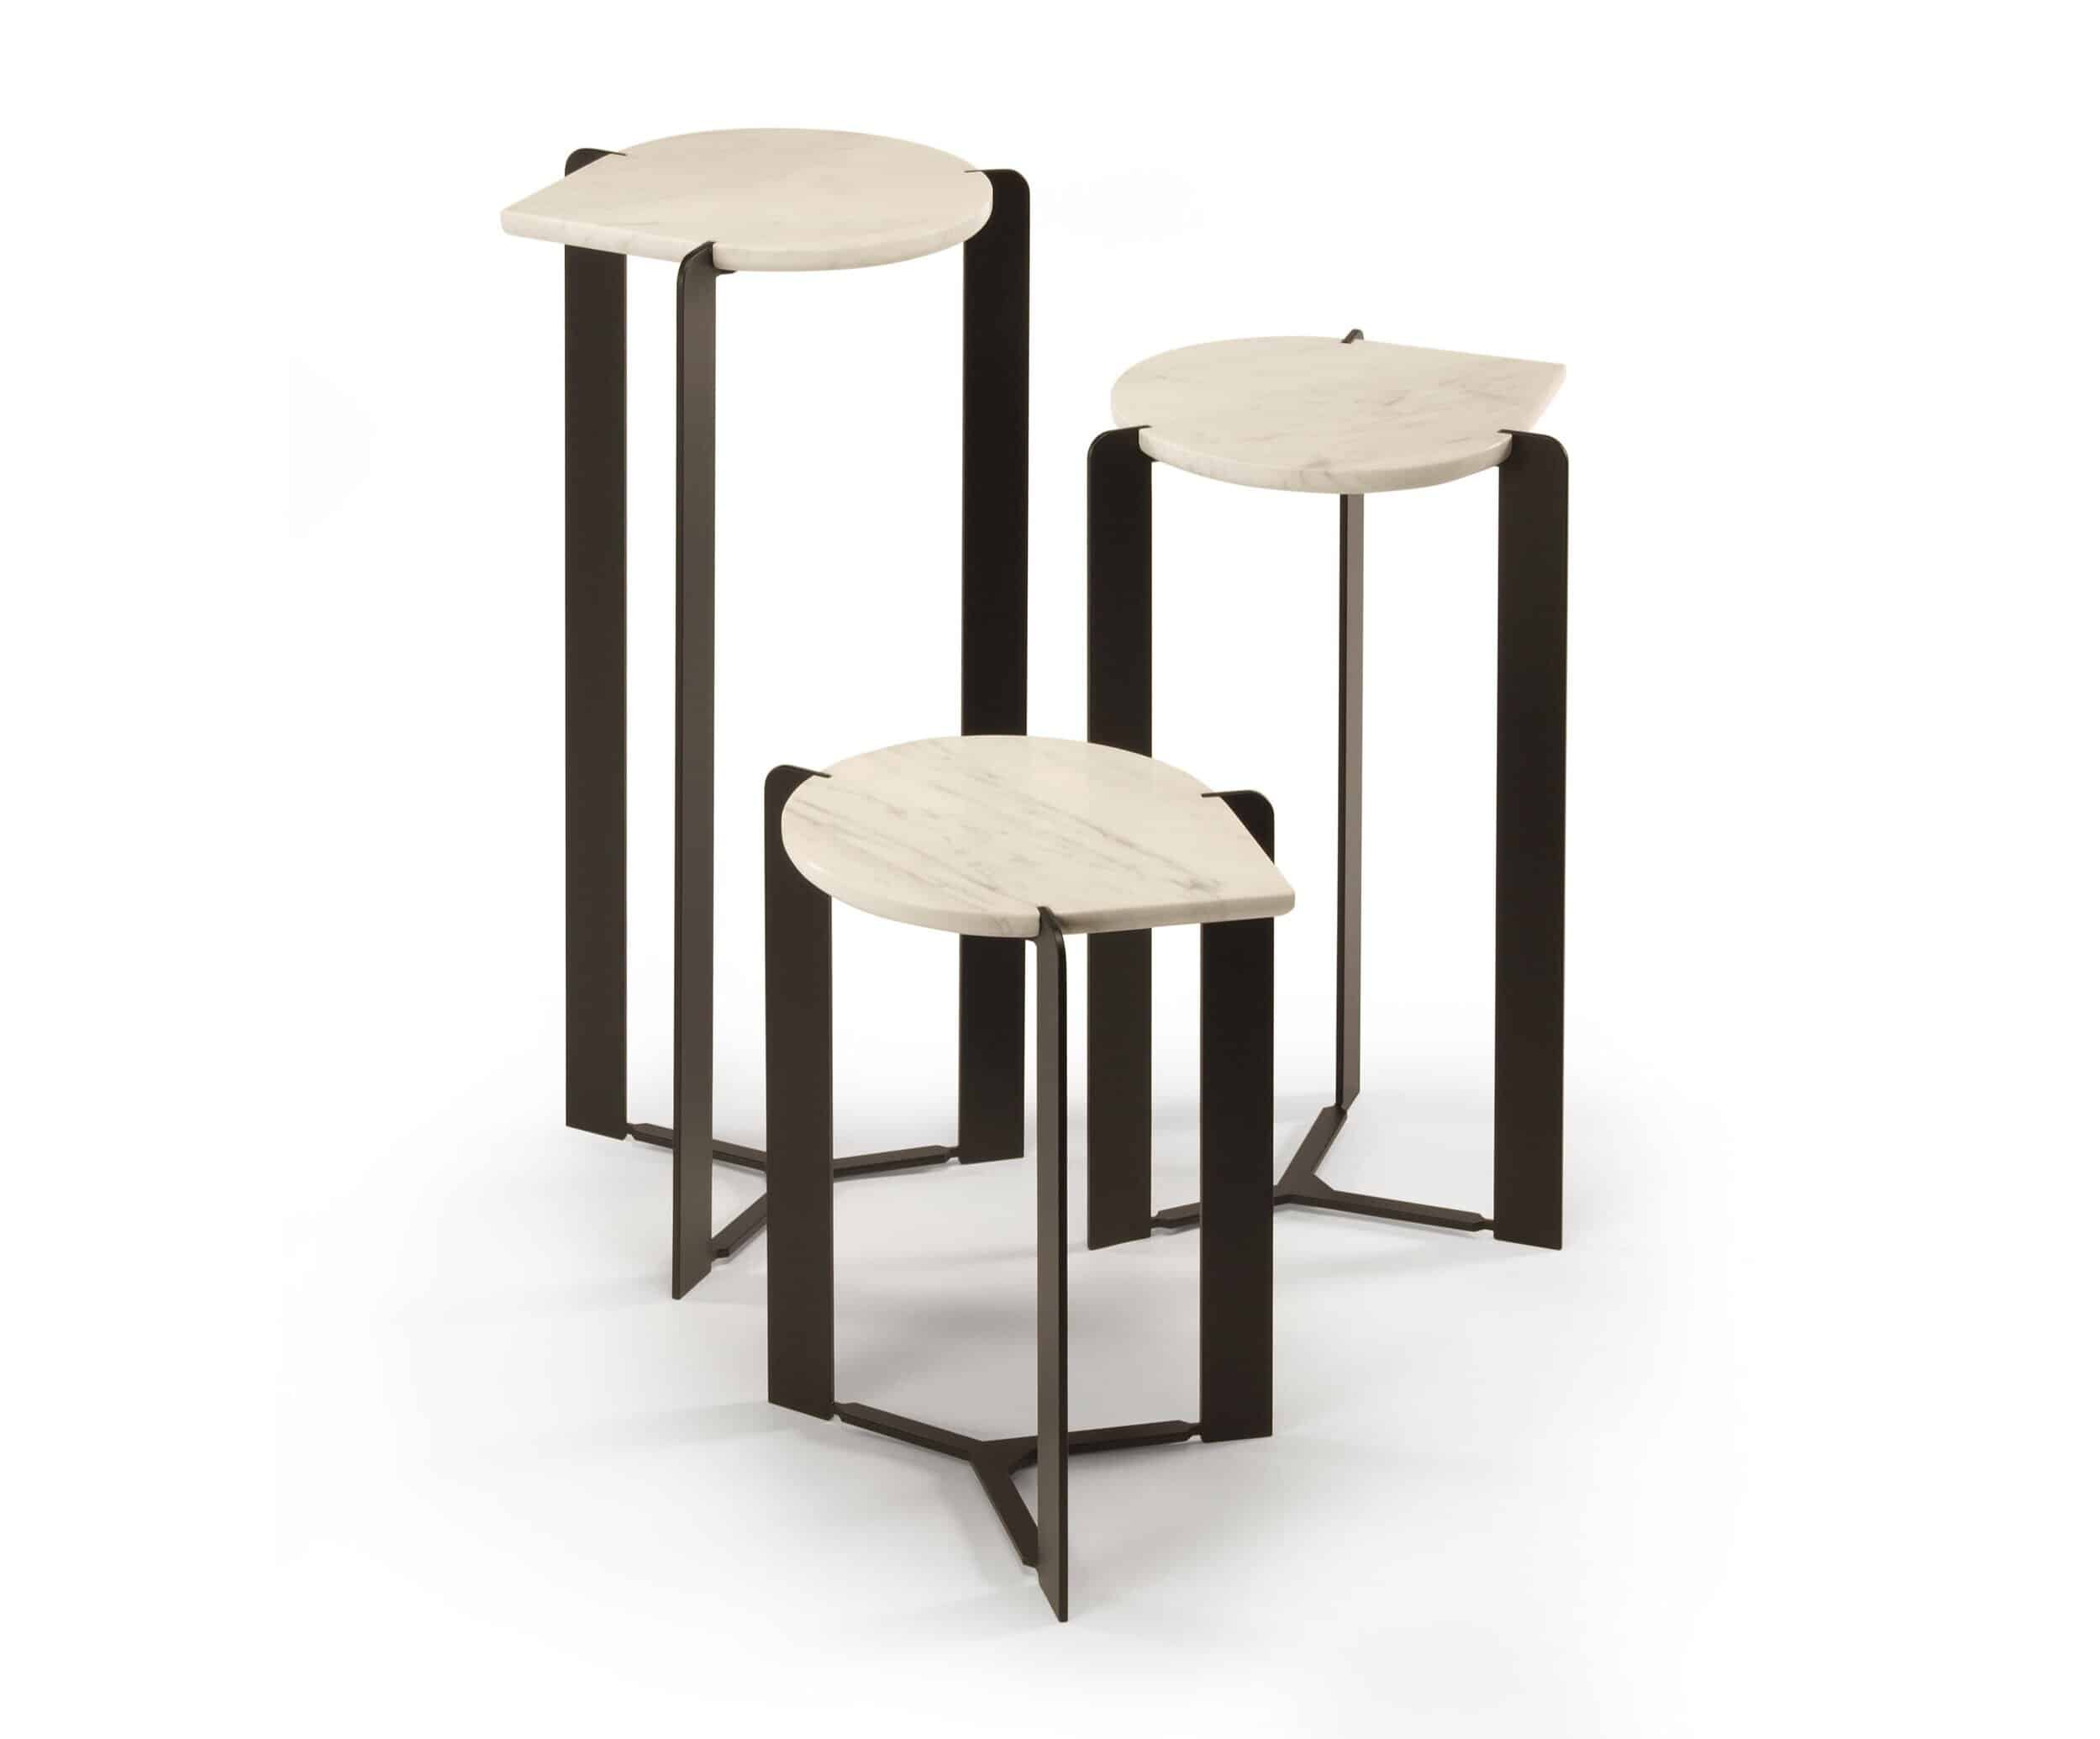 The Drop Series Side Table by Skram sold through Steelcase.